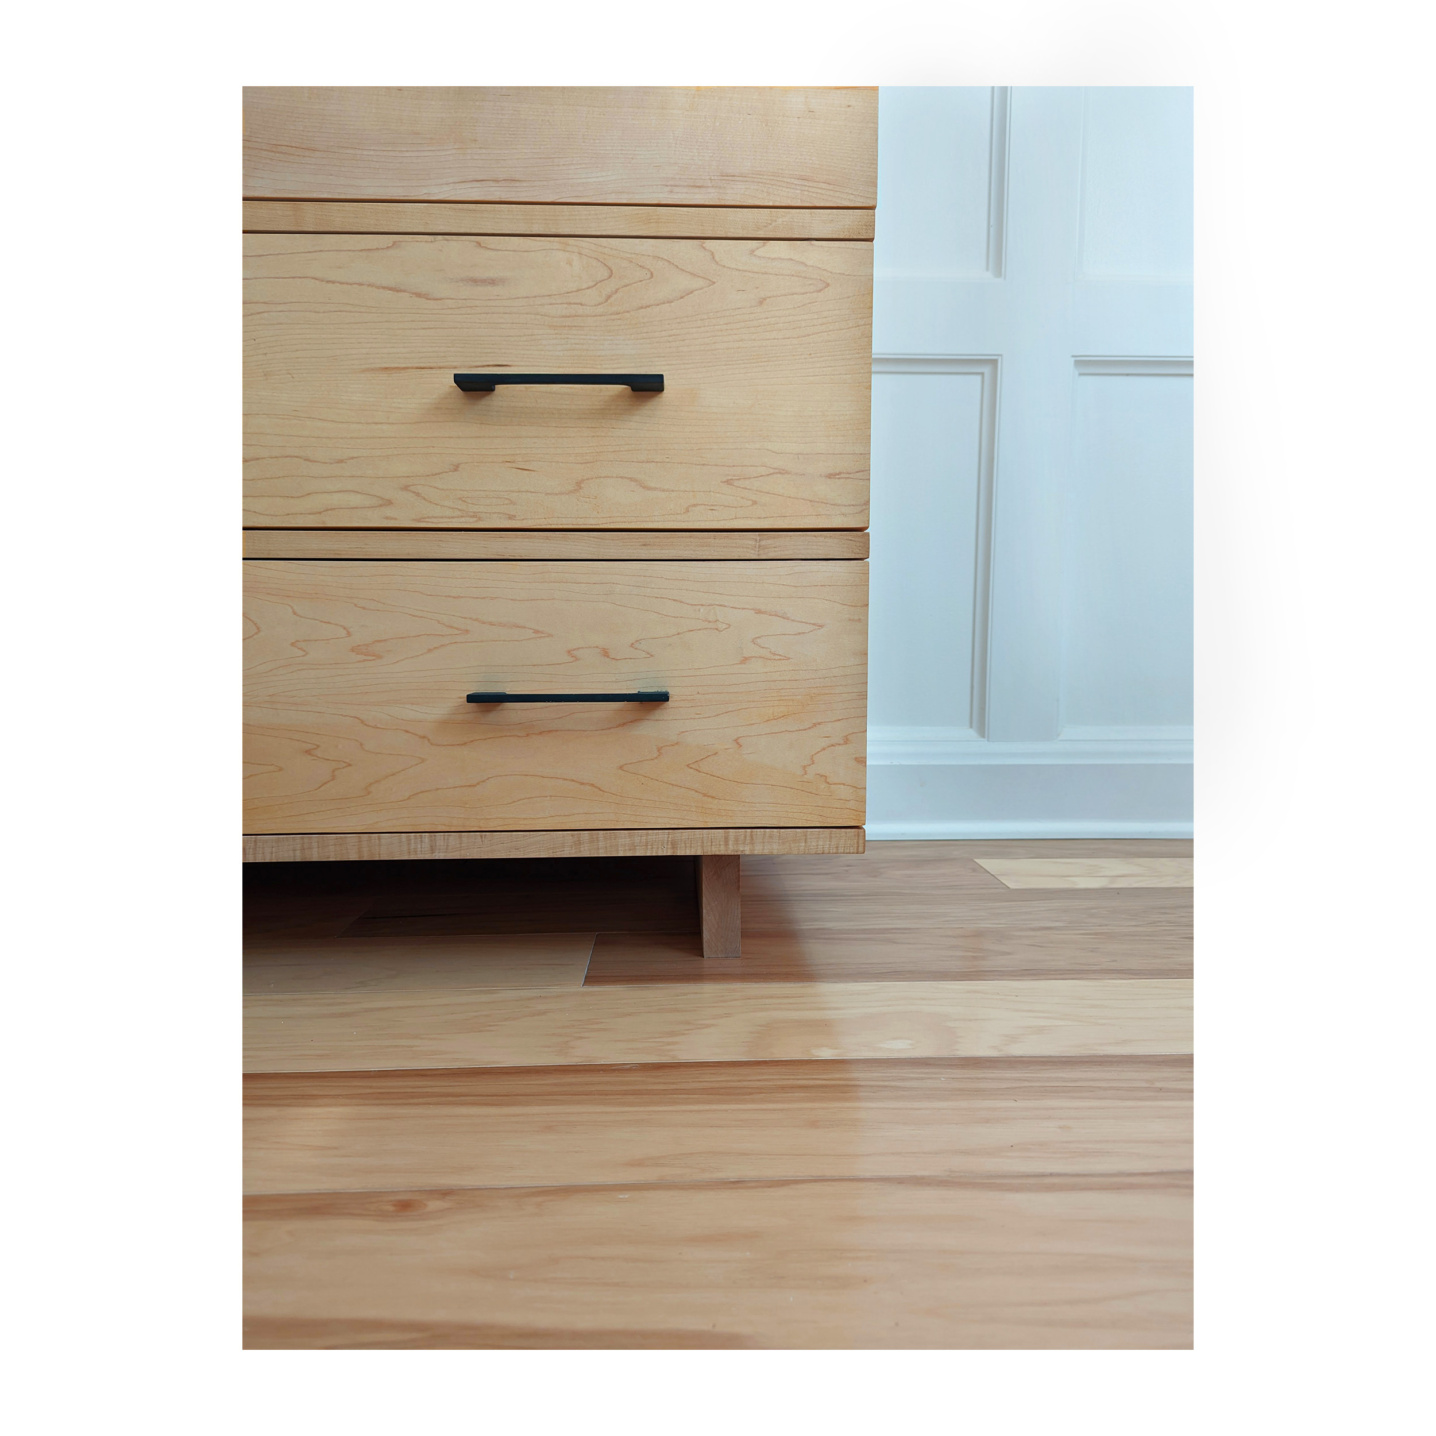 Maple dresser legs and drawer fronts--Made by 57NorthPlank Tailored Modern Furniture